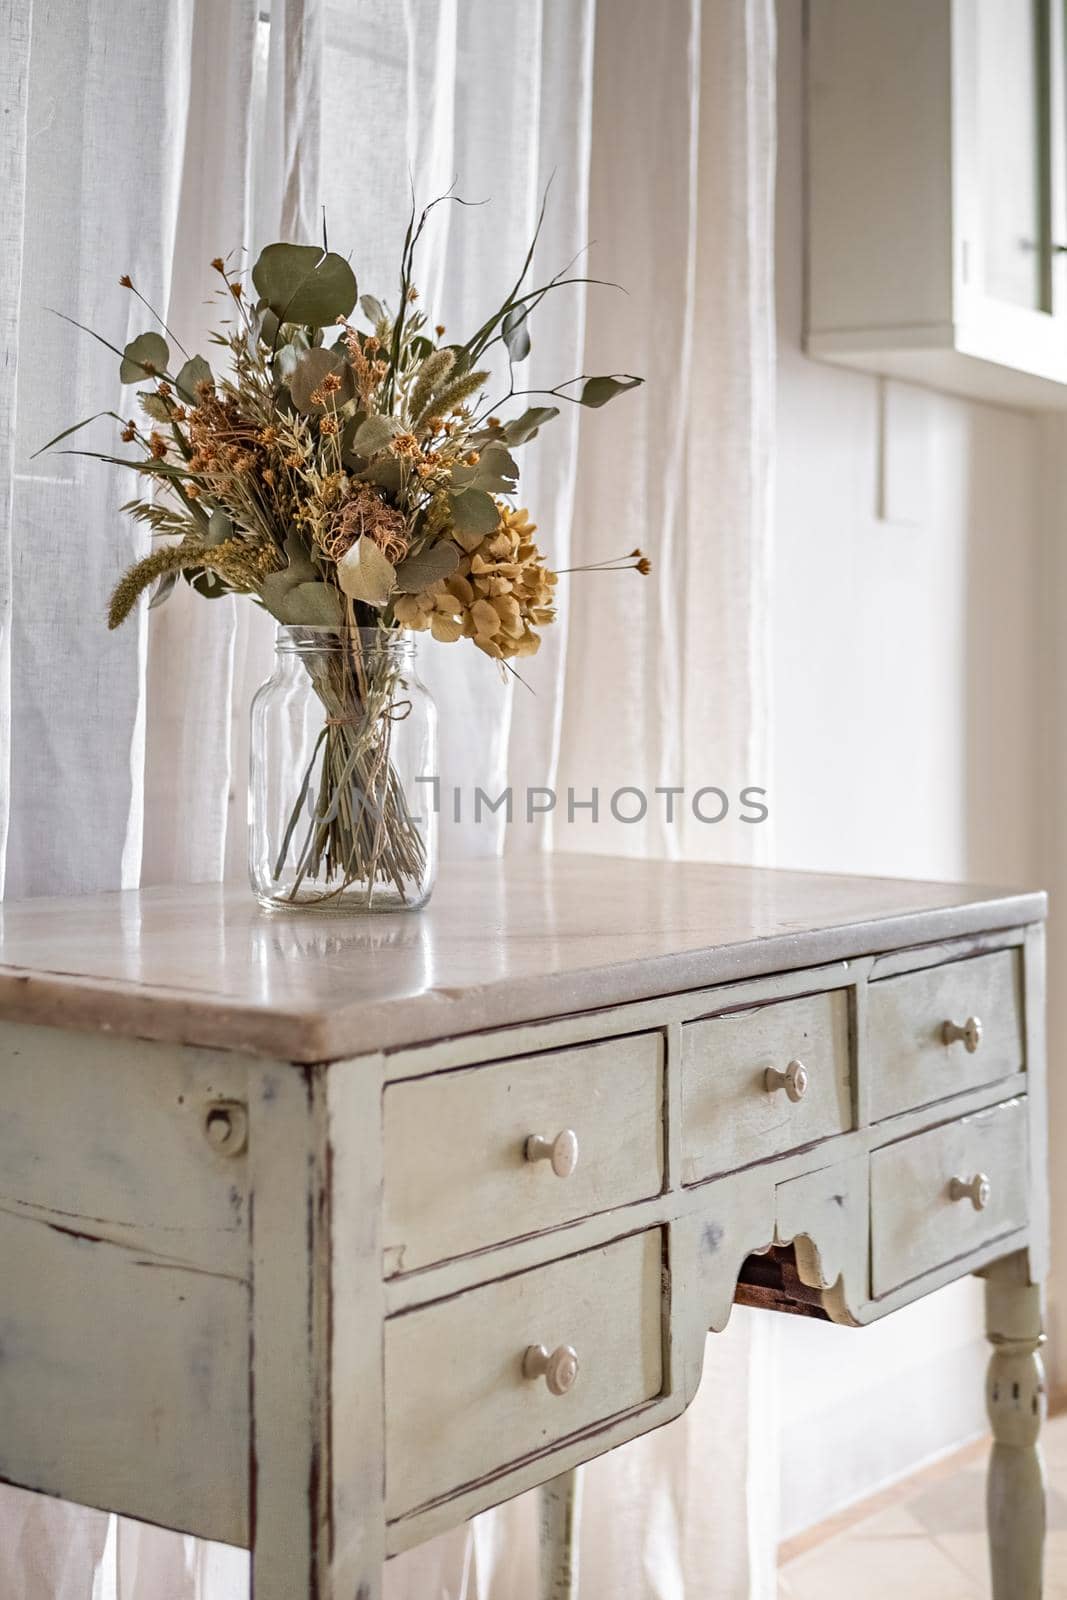 A bouquet of dry flowers in a hallway of the retro style decorated apartment with vintage furniture